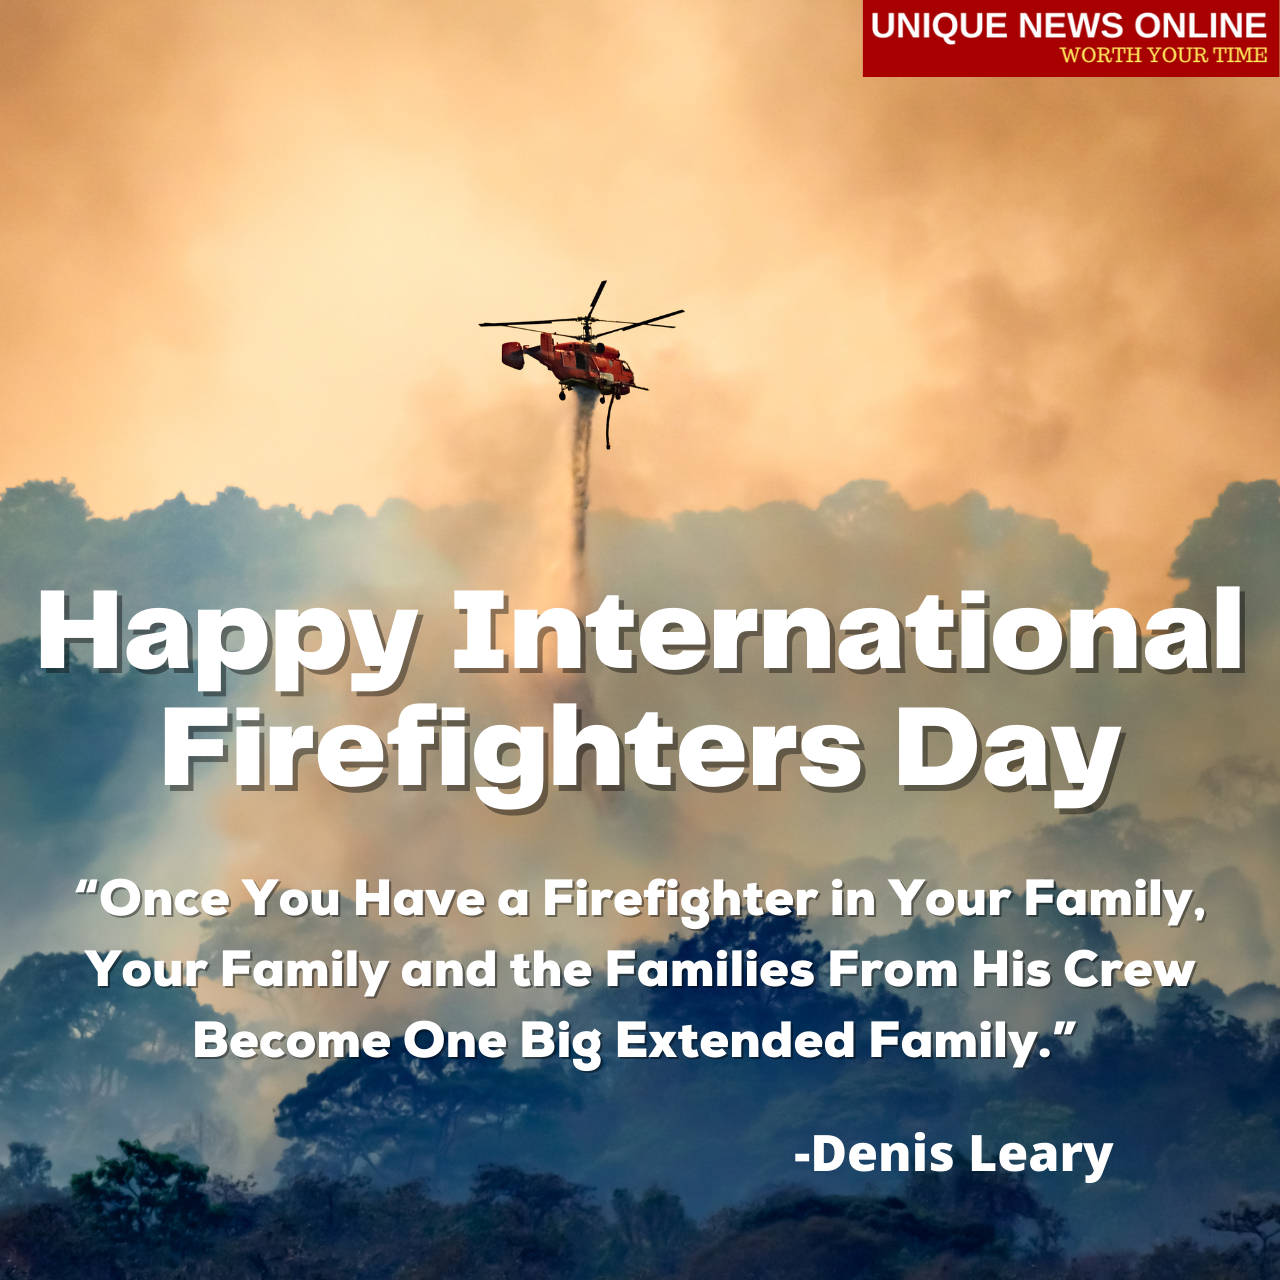 International Firefighters Day 2021 Theme, Quotes, Images, and Wishes